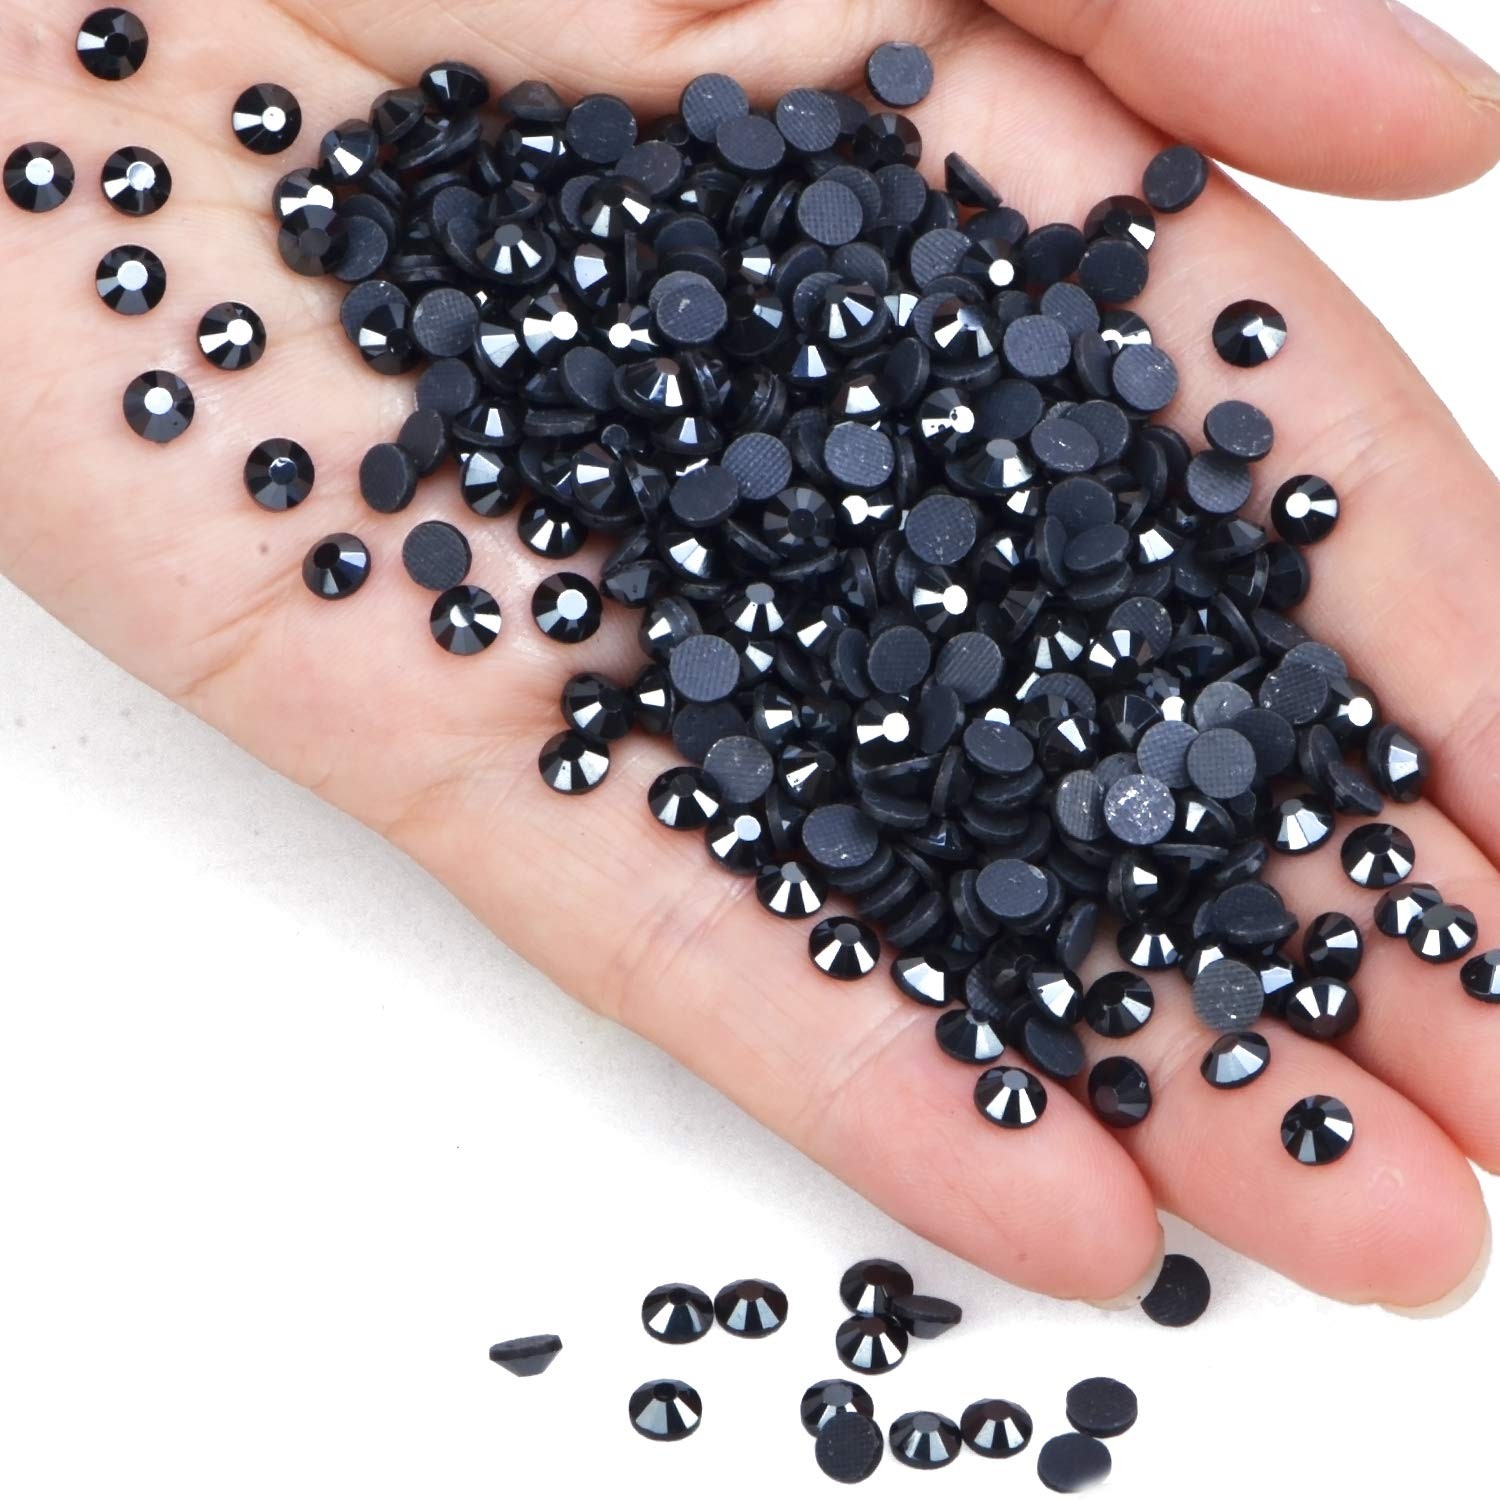 4mm Round Shape Stone Crystal Kundans Beads Stone for Art & Craft, Jewellery Making, Bangles, Embroidery & DIY Works (Black)(10000 Pieces)